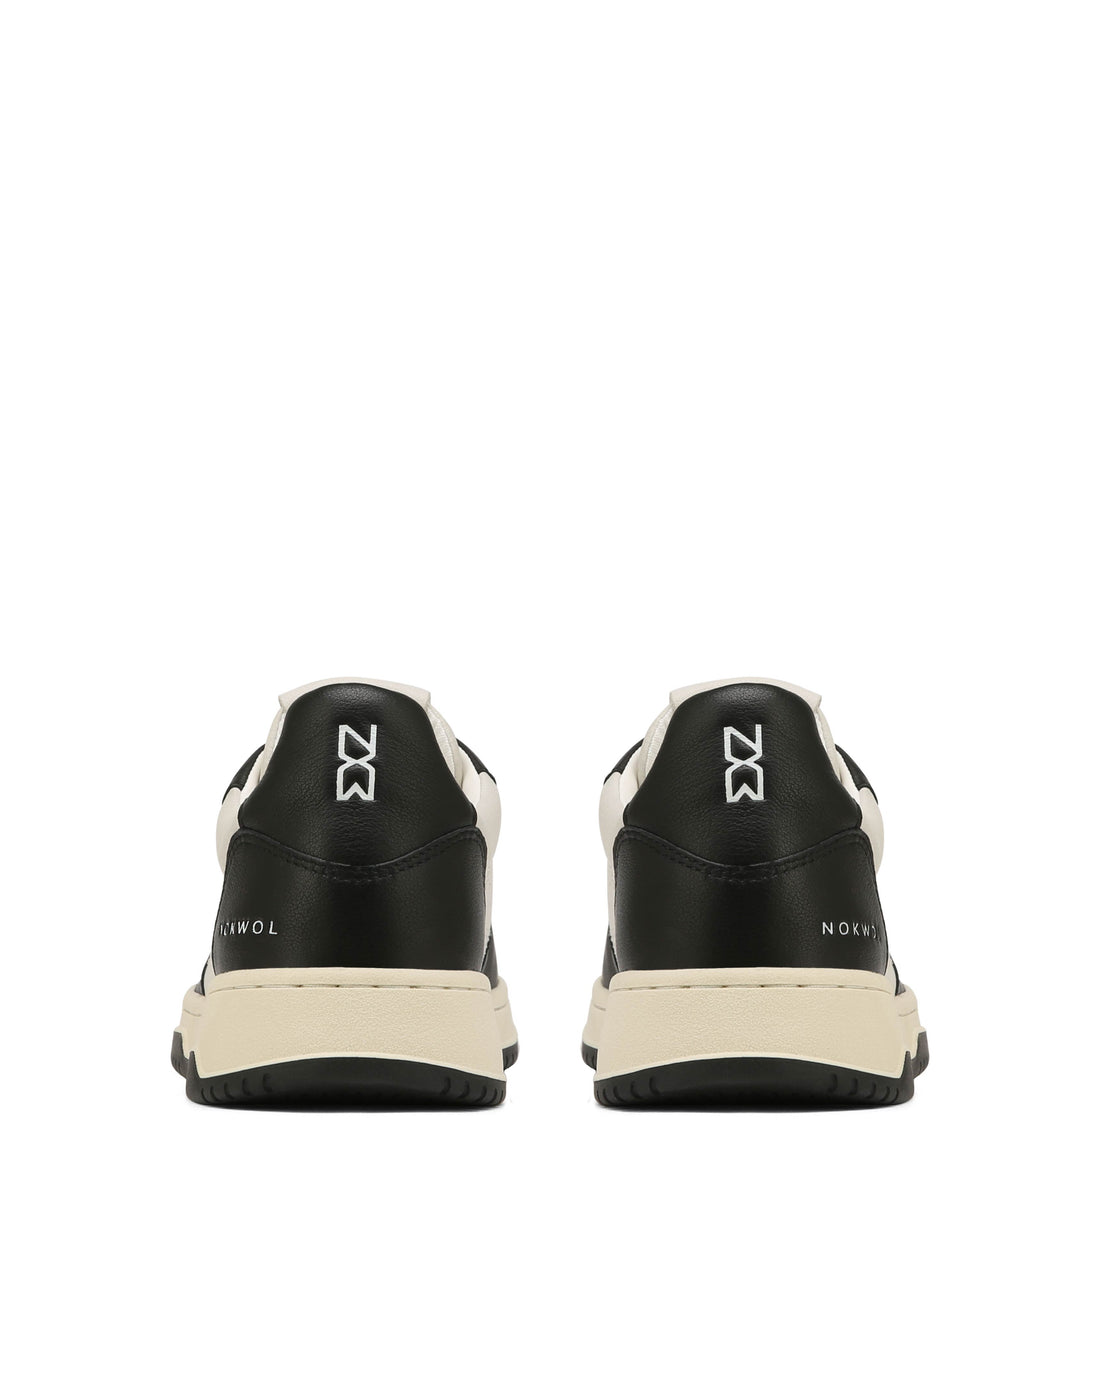 Evie Black/Off White Leather